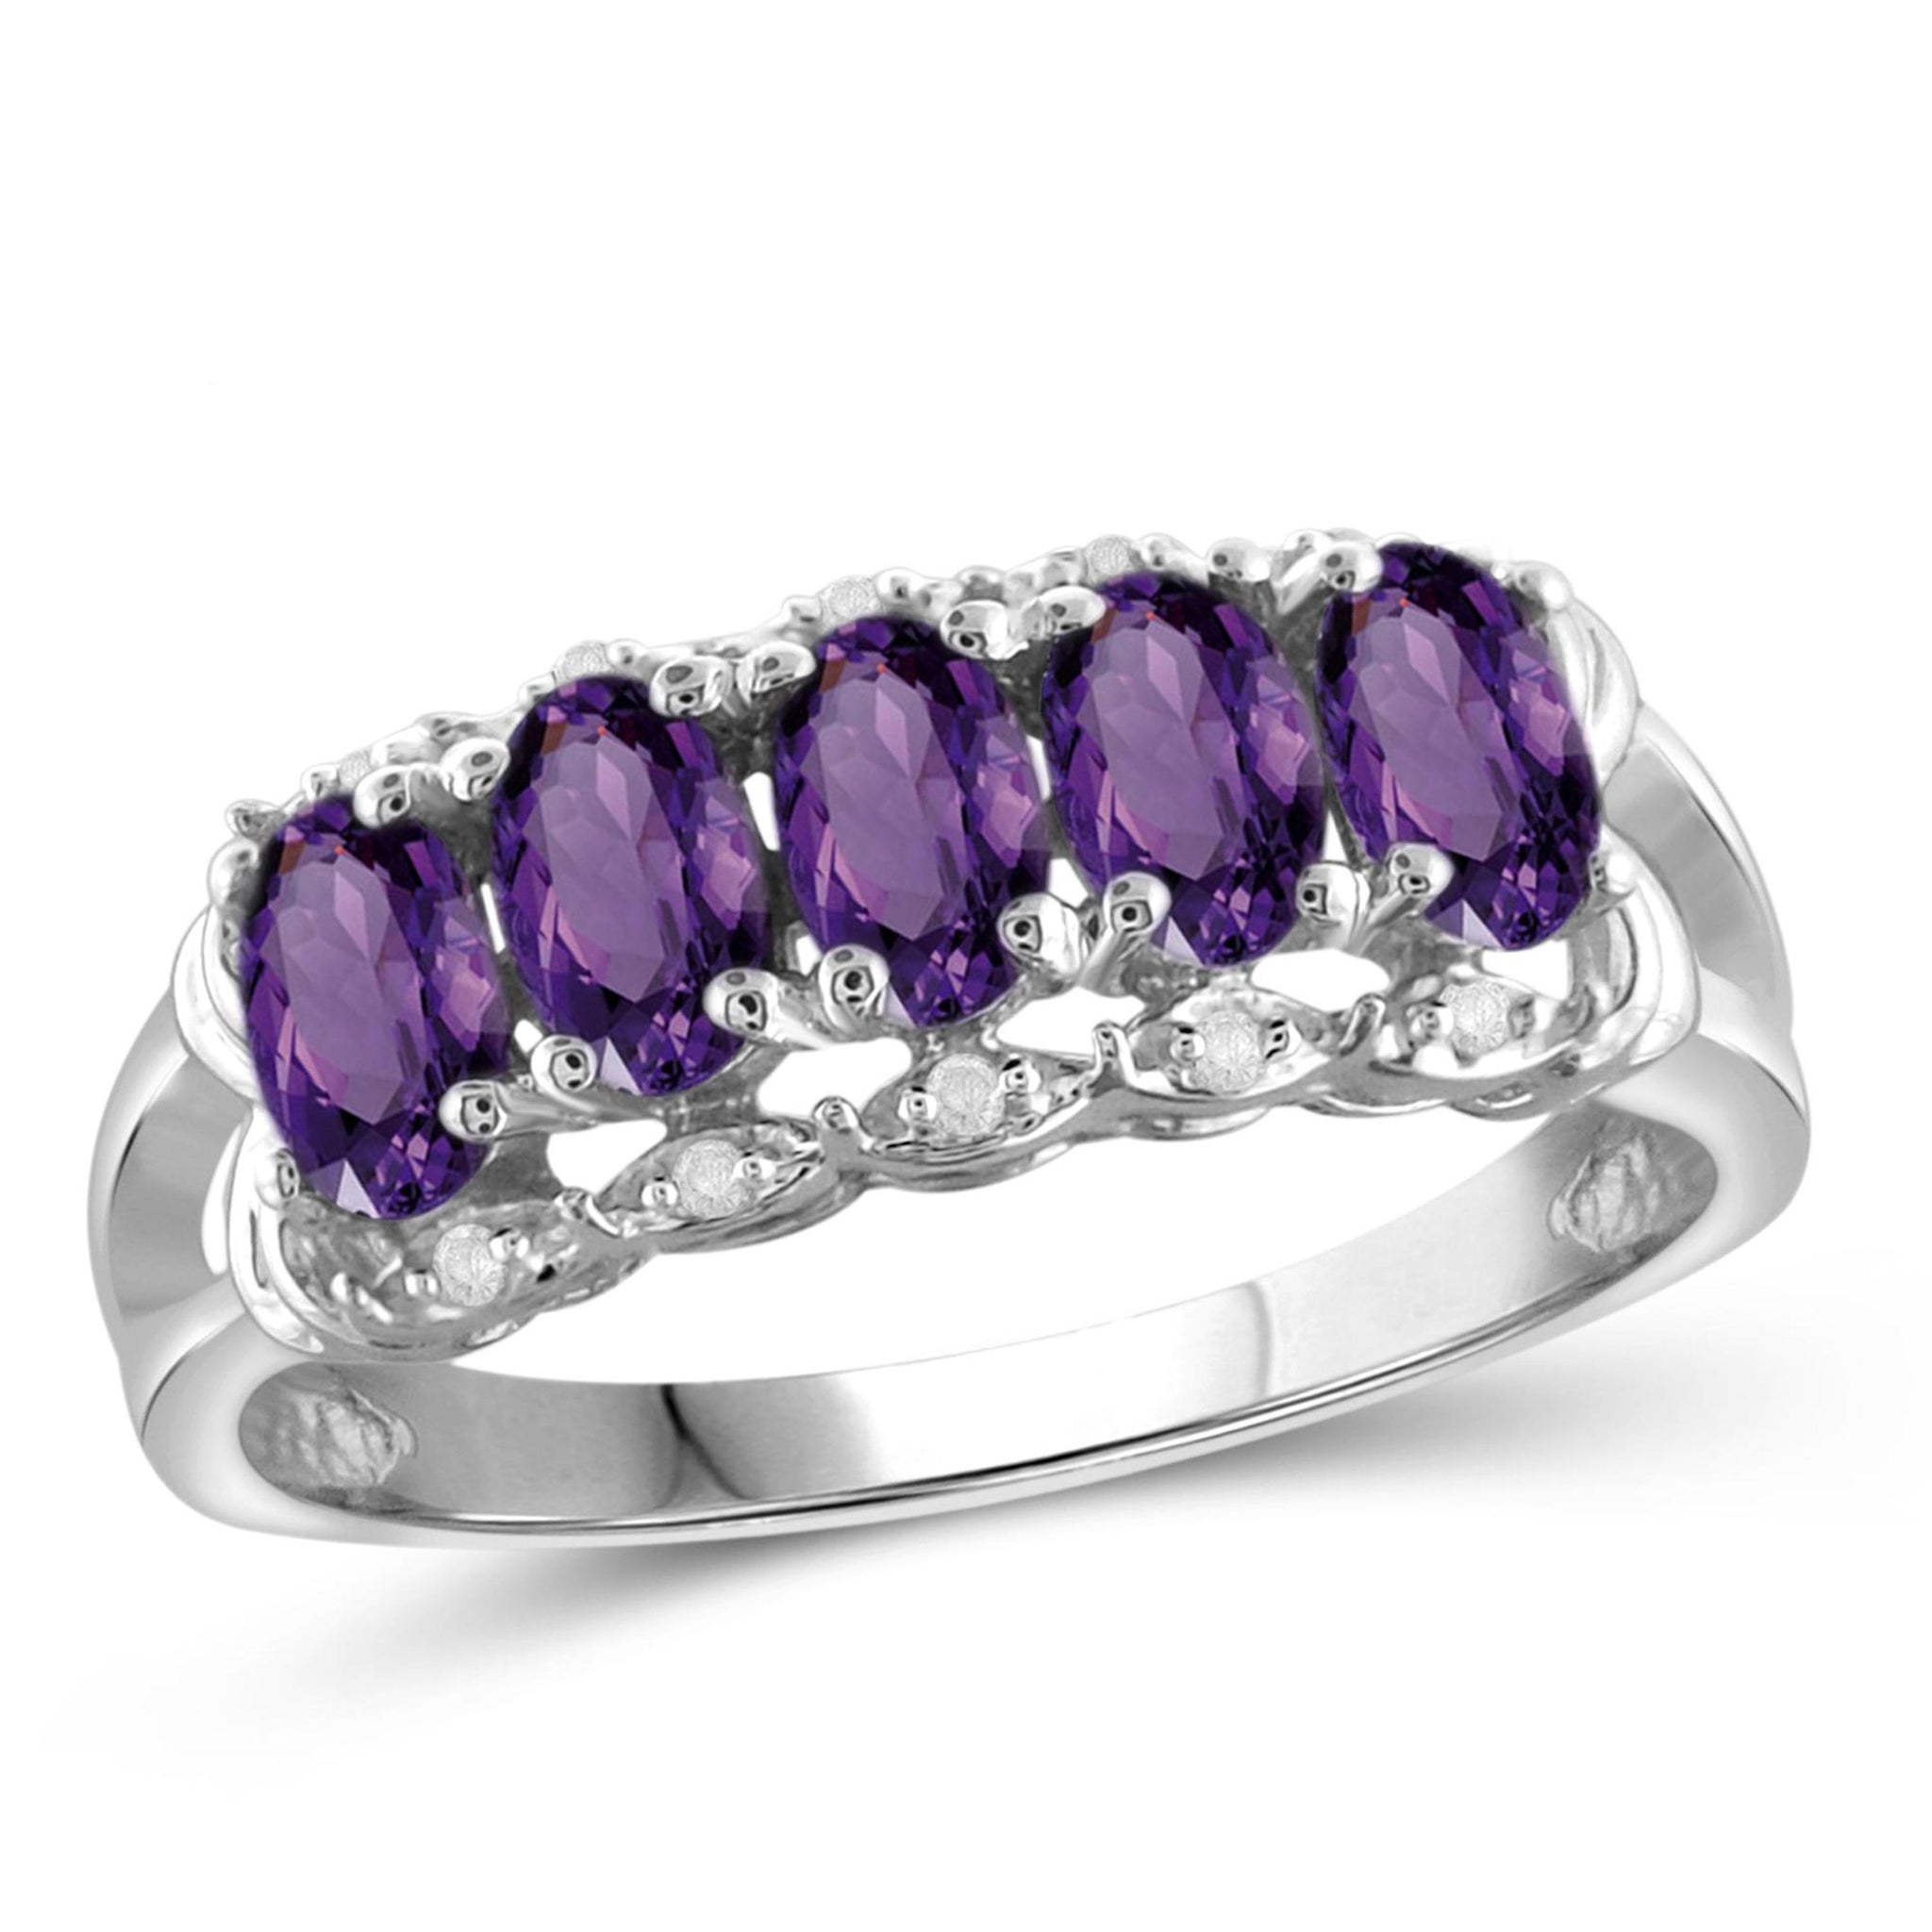 JewelonFire 1.00 Carat T.G.W. Amethyst And 1/20 Carat T.W. White Diamond Sterling Silver Ring - Assorted Colors